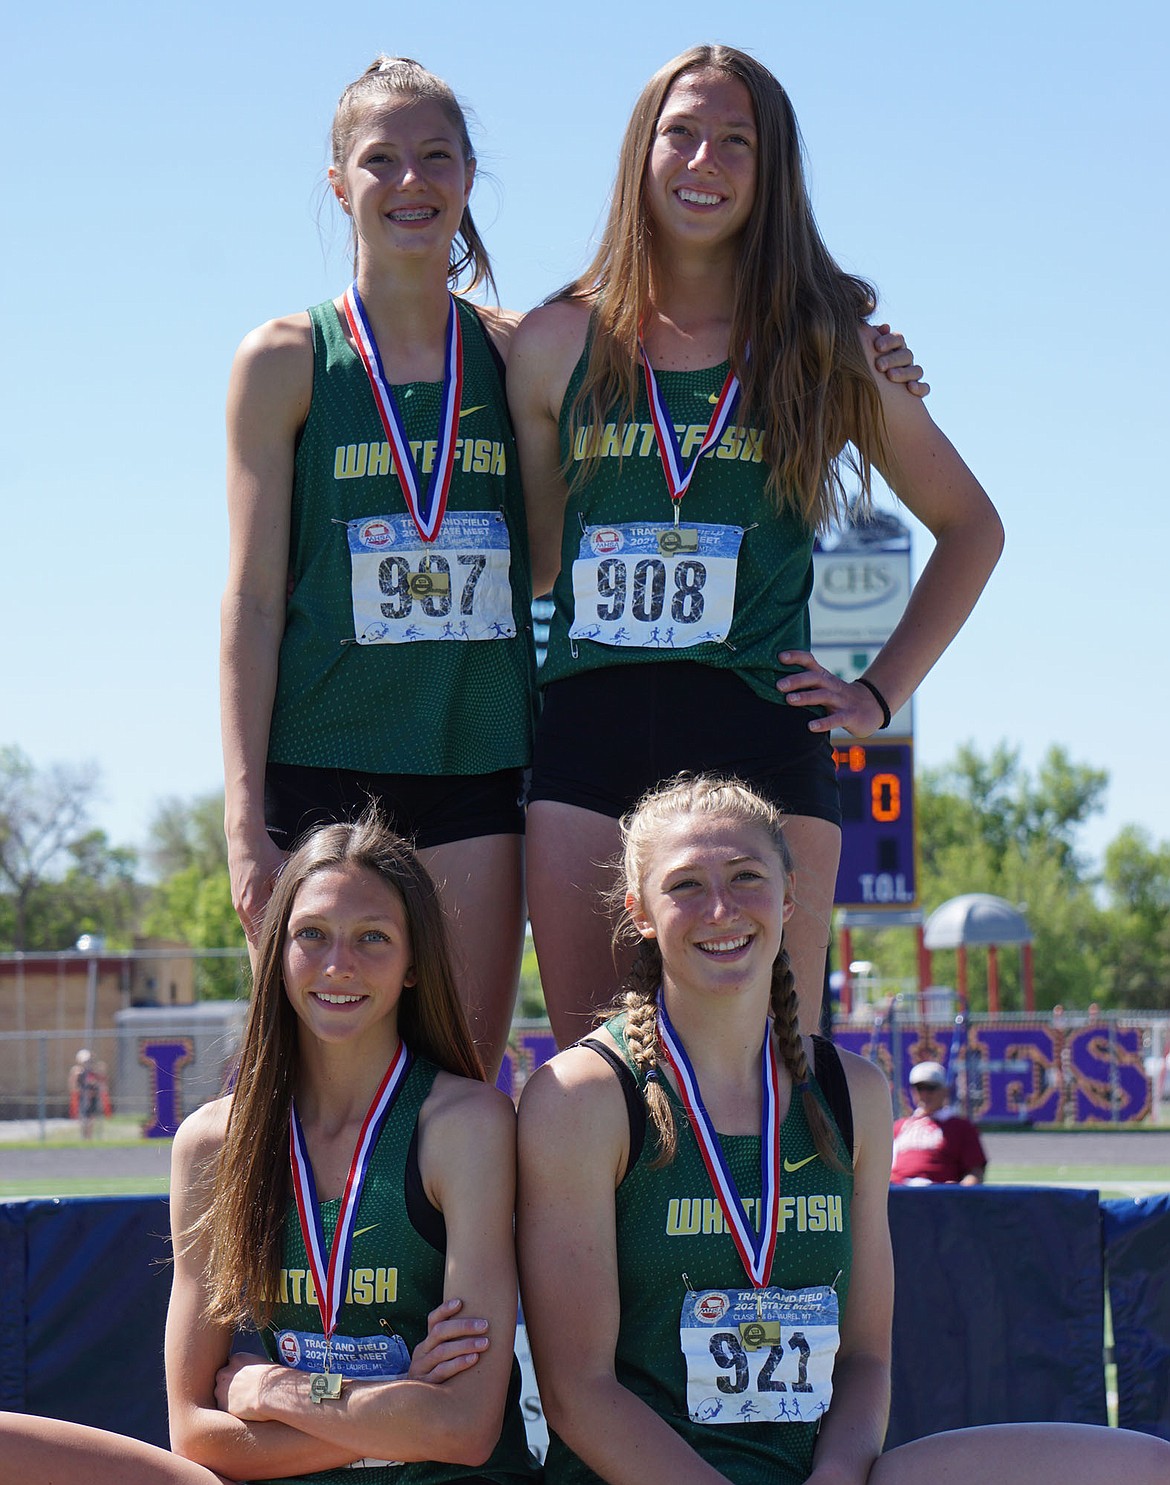 The Whitefish women’s 4x100 relay earned the state championship at the Class A state track meet at Laurel. On the podium, top from left, are Hailey Ells, Mikenna Ells; on bottom, Erin Wilde and Brook Zetooney. (Matt Weller photo)